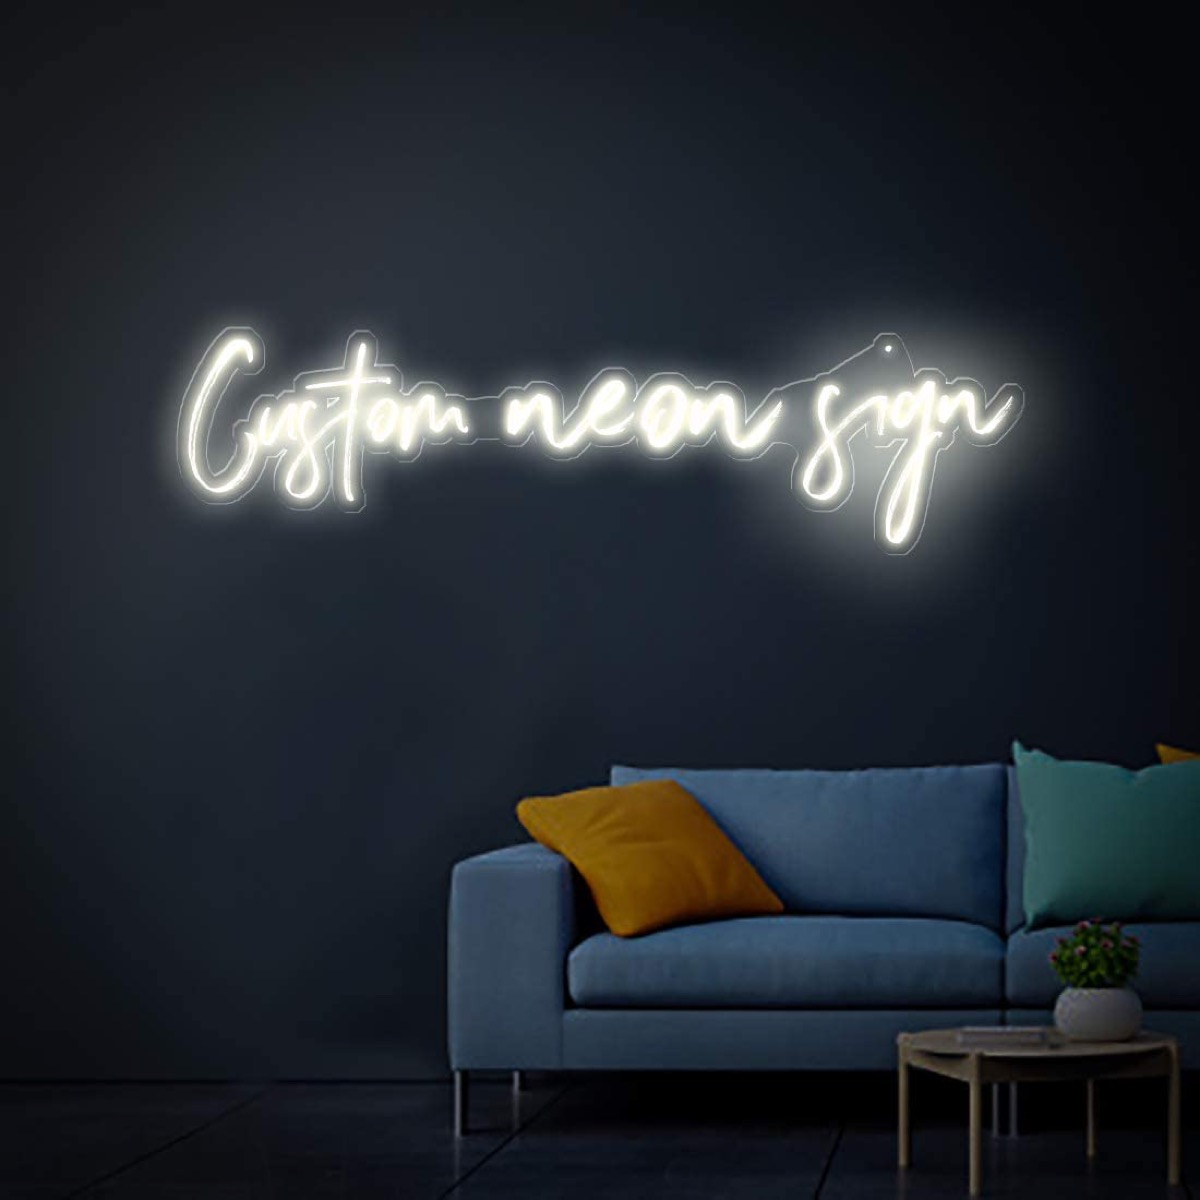 Neon light sign above couch